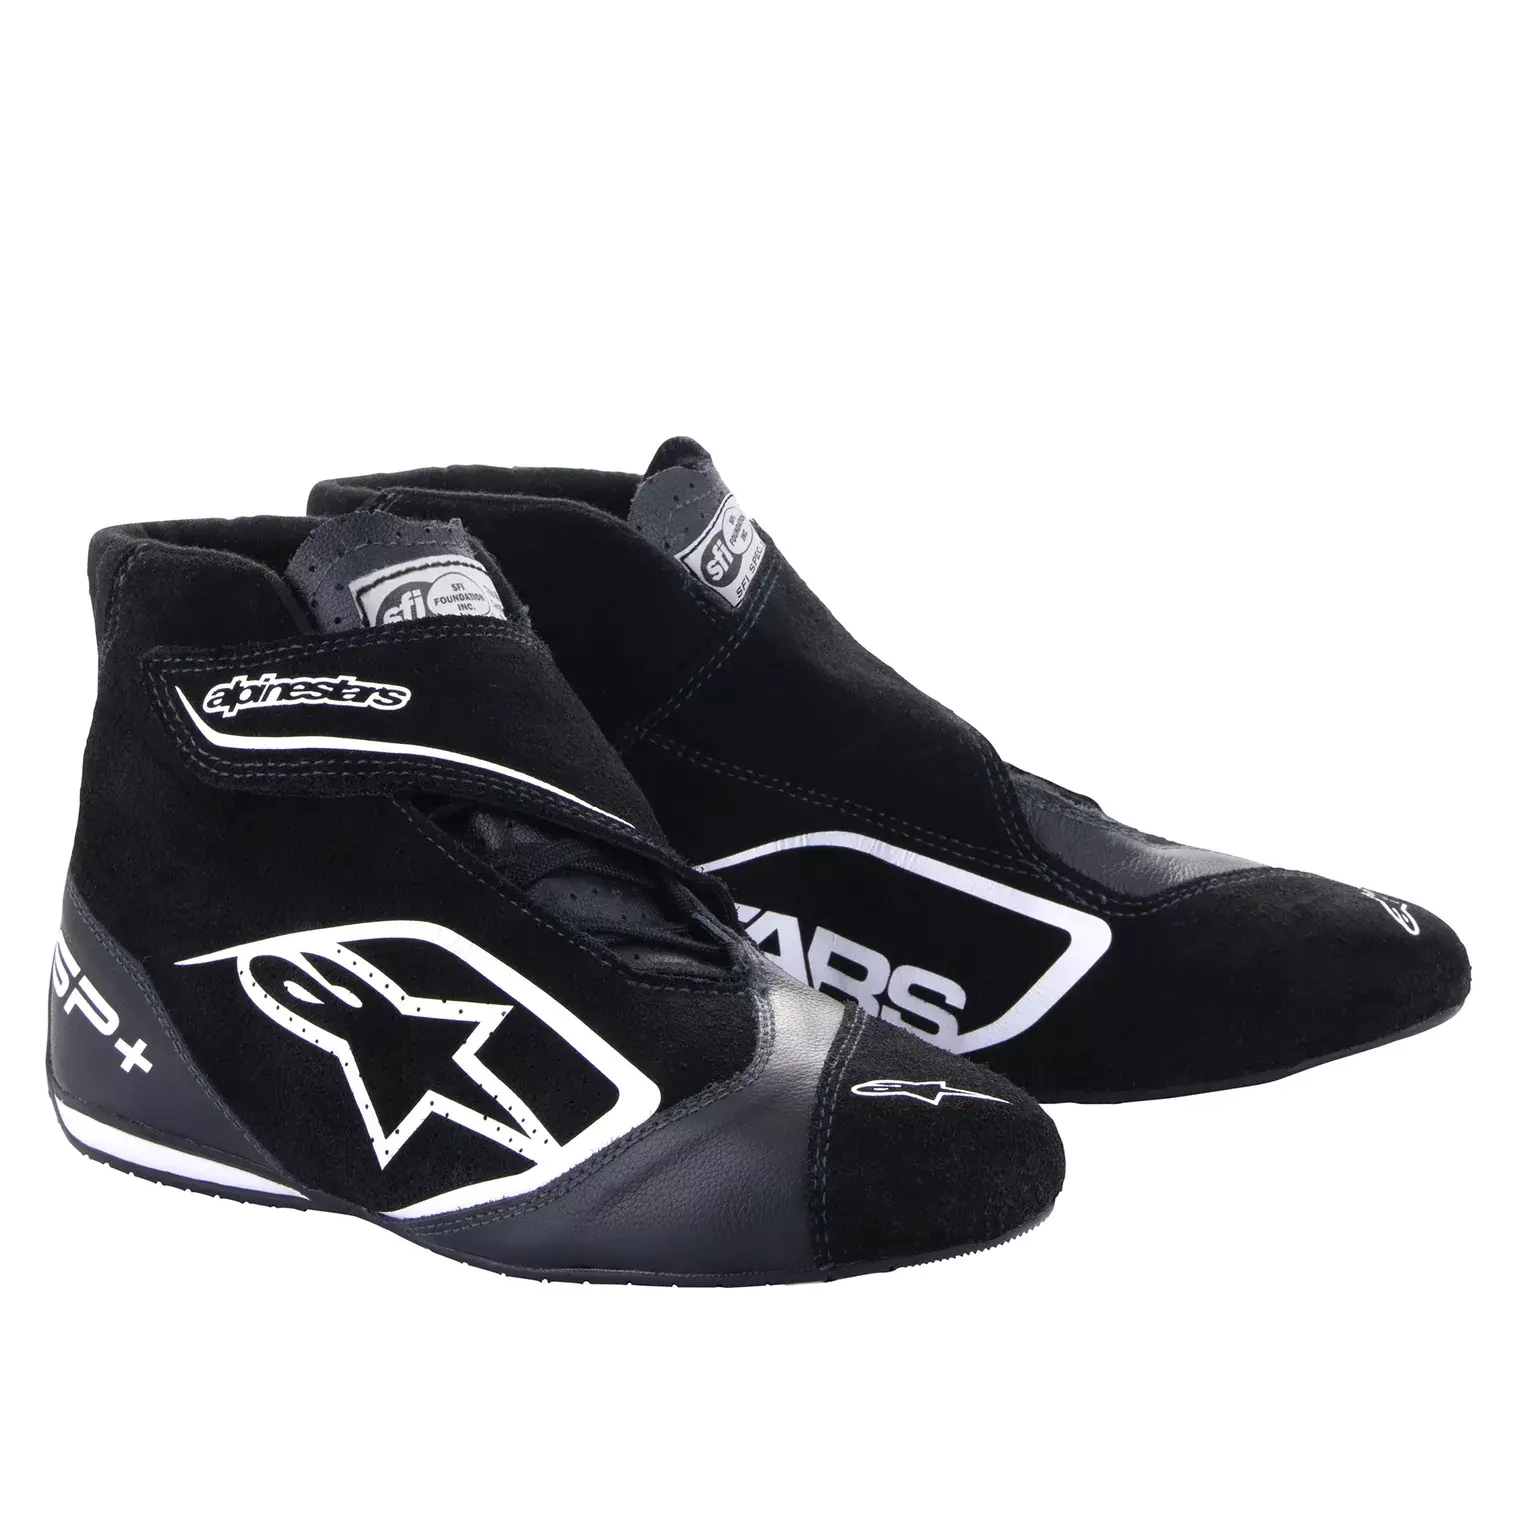 Alpinestars 2710823-12-12 Driving Shoe, SP+, Mid-Top, SFI 3.3, FIA Approved, Suede Outer, Nomex Inner, Black / White, Size 12, Pair